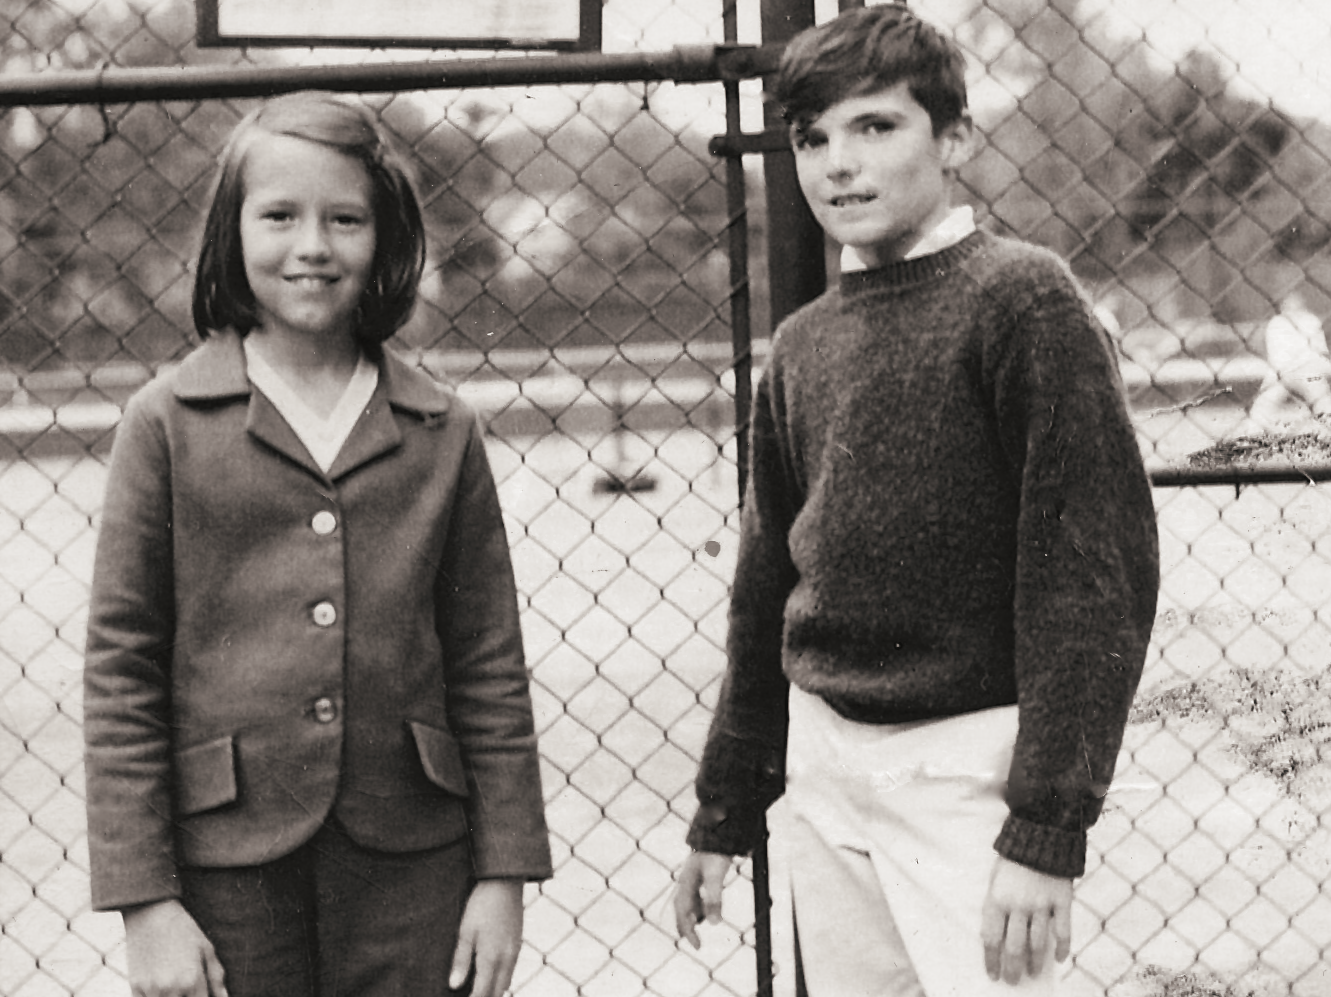 Whether as a child pictured with Gail Ramsay (center below) with whom he would coach at Princeton for two decades, as a fun-loving undergraduate or as a coach, Callahan has been a beloved friend to hundreds and hundreds in the squash world.